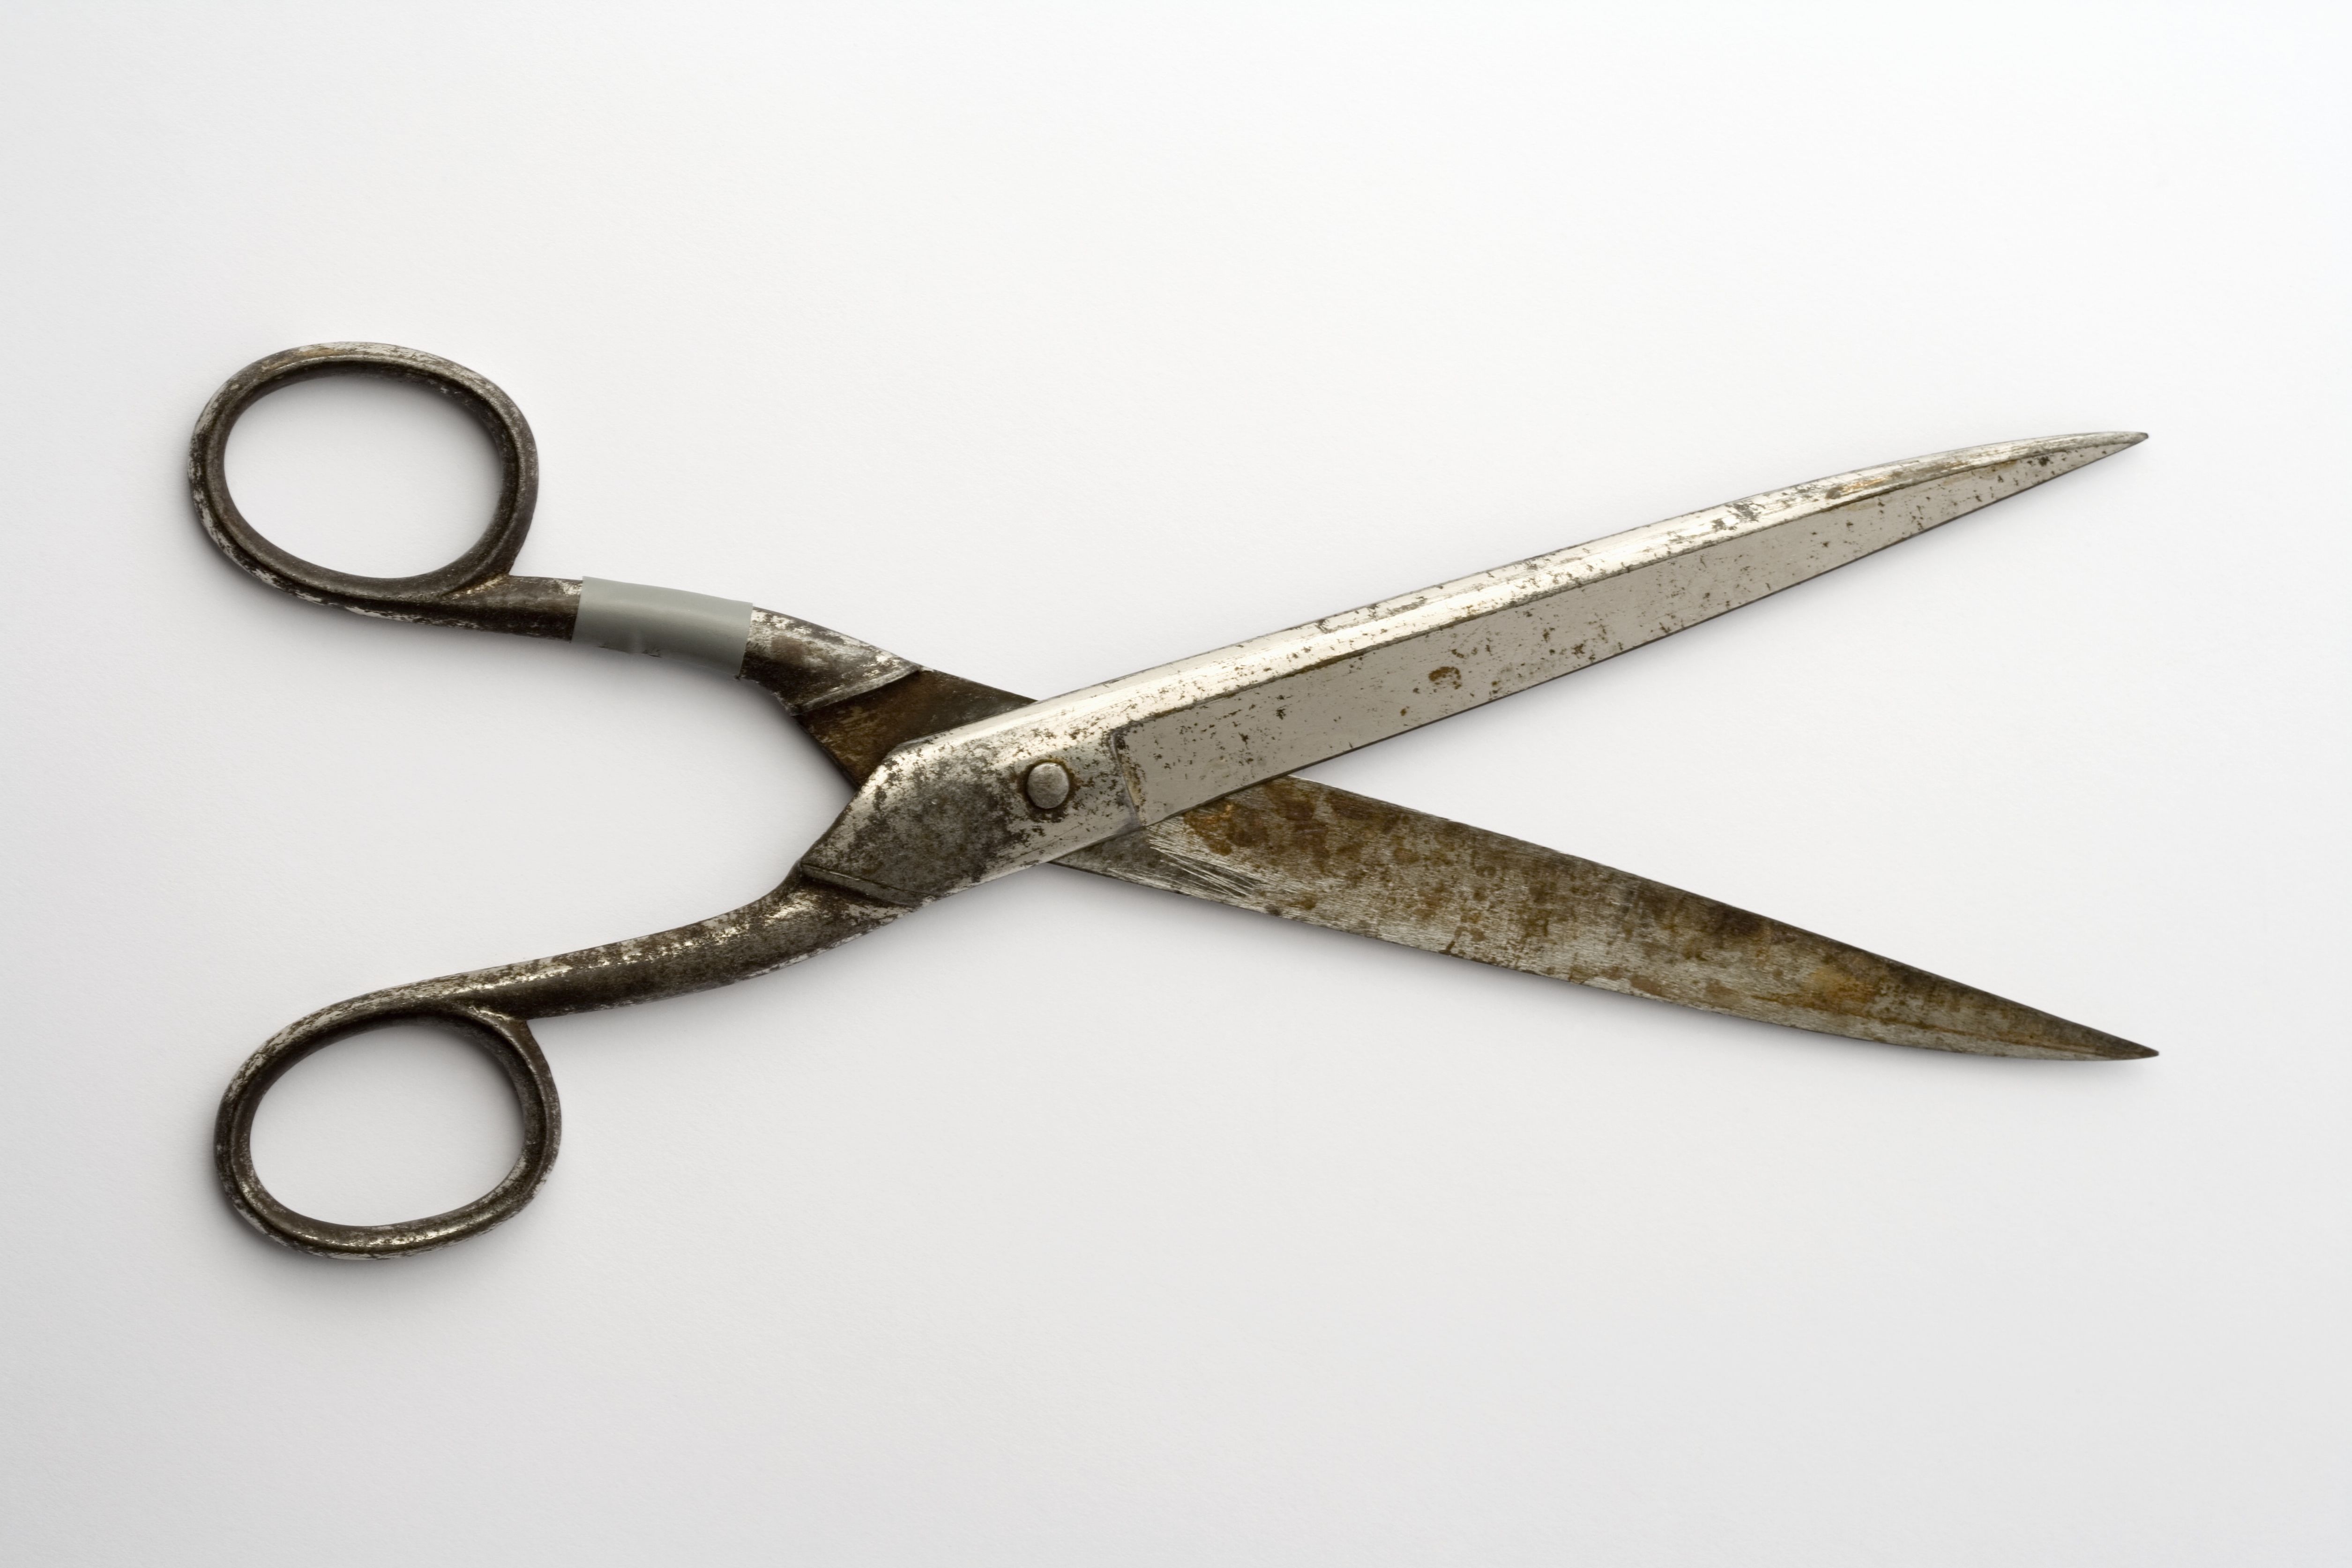 How to Sharpen Hair Cutting Scissors at Home: DIY Methods